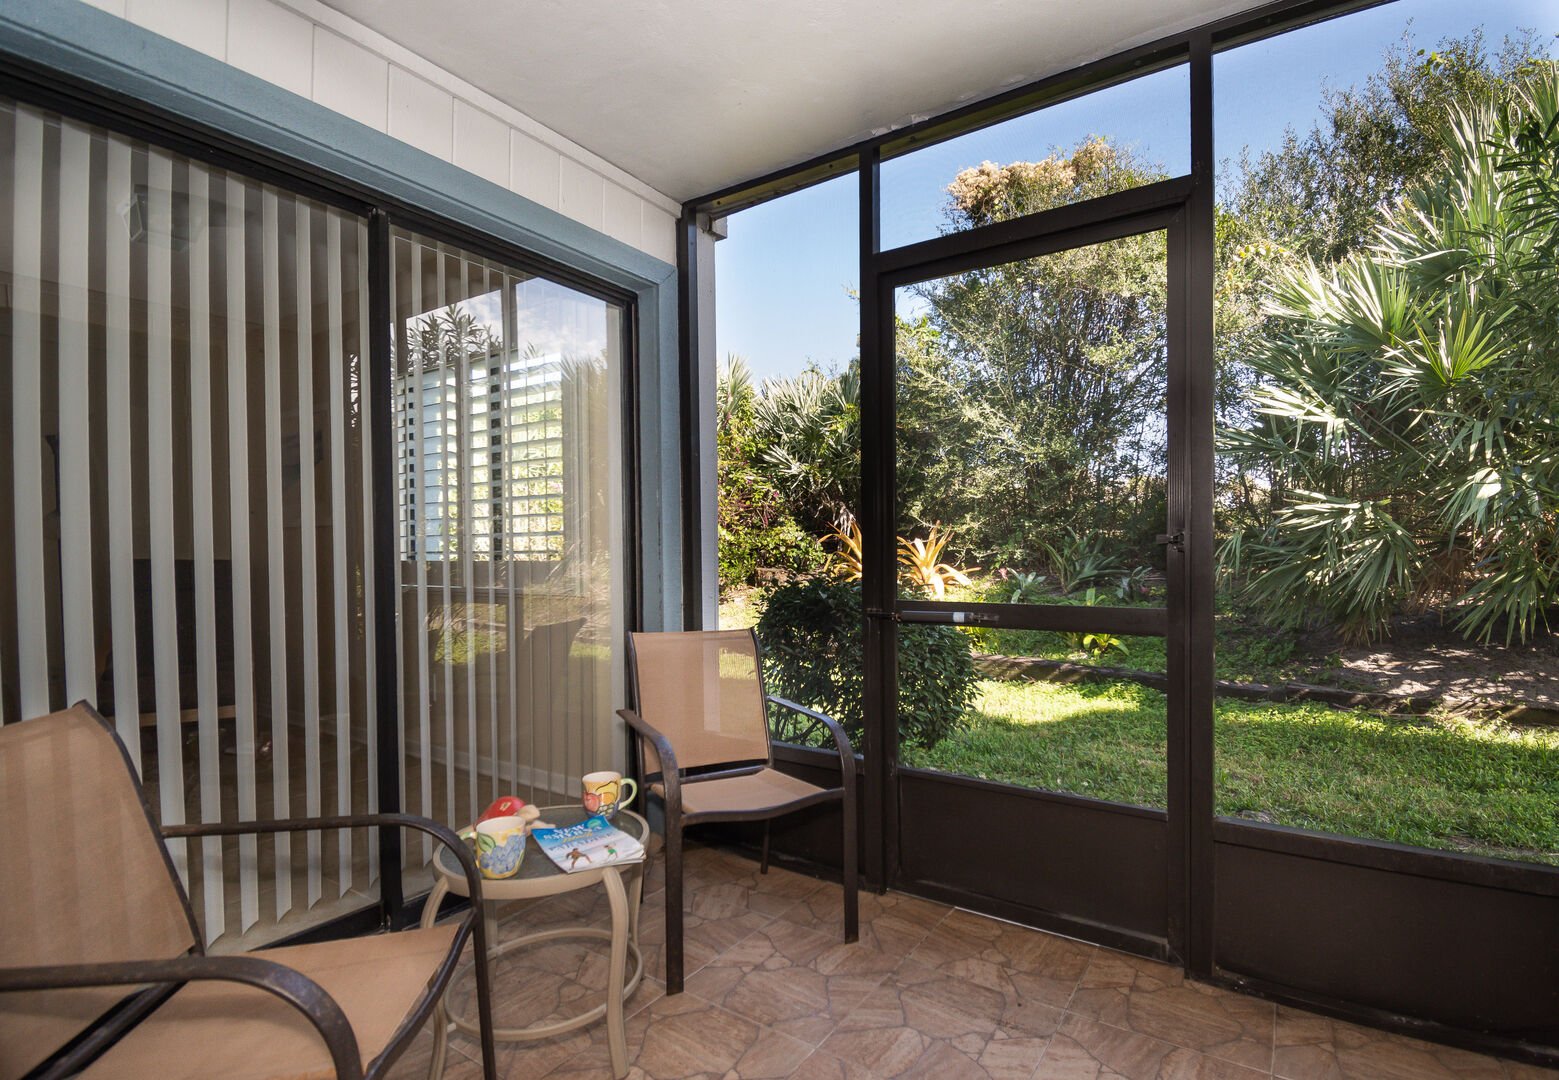 Relax on the screened patio and enjoy the Florida sunshine.